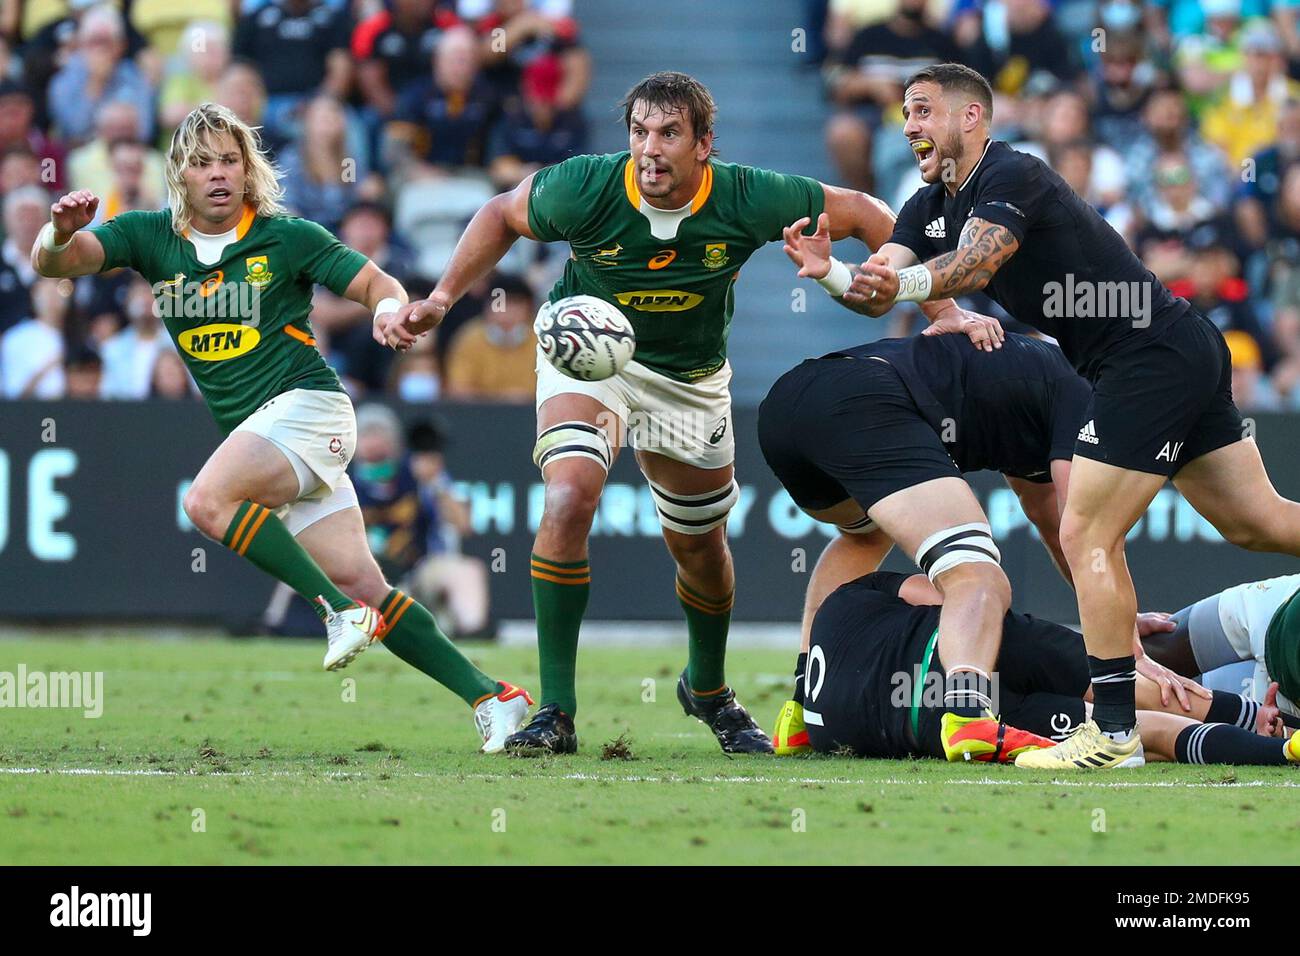 New Zealands TJ Perenara, right, passes the ball as South Africas Faf de Klerk, left, and Eben Etzebeth watch during the Rugby Championship test match between the Springboks and the All Blacks